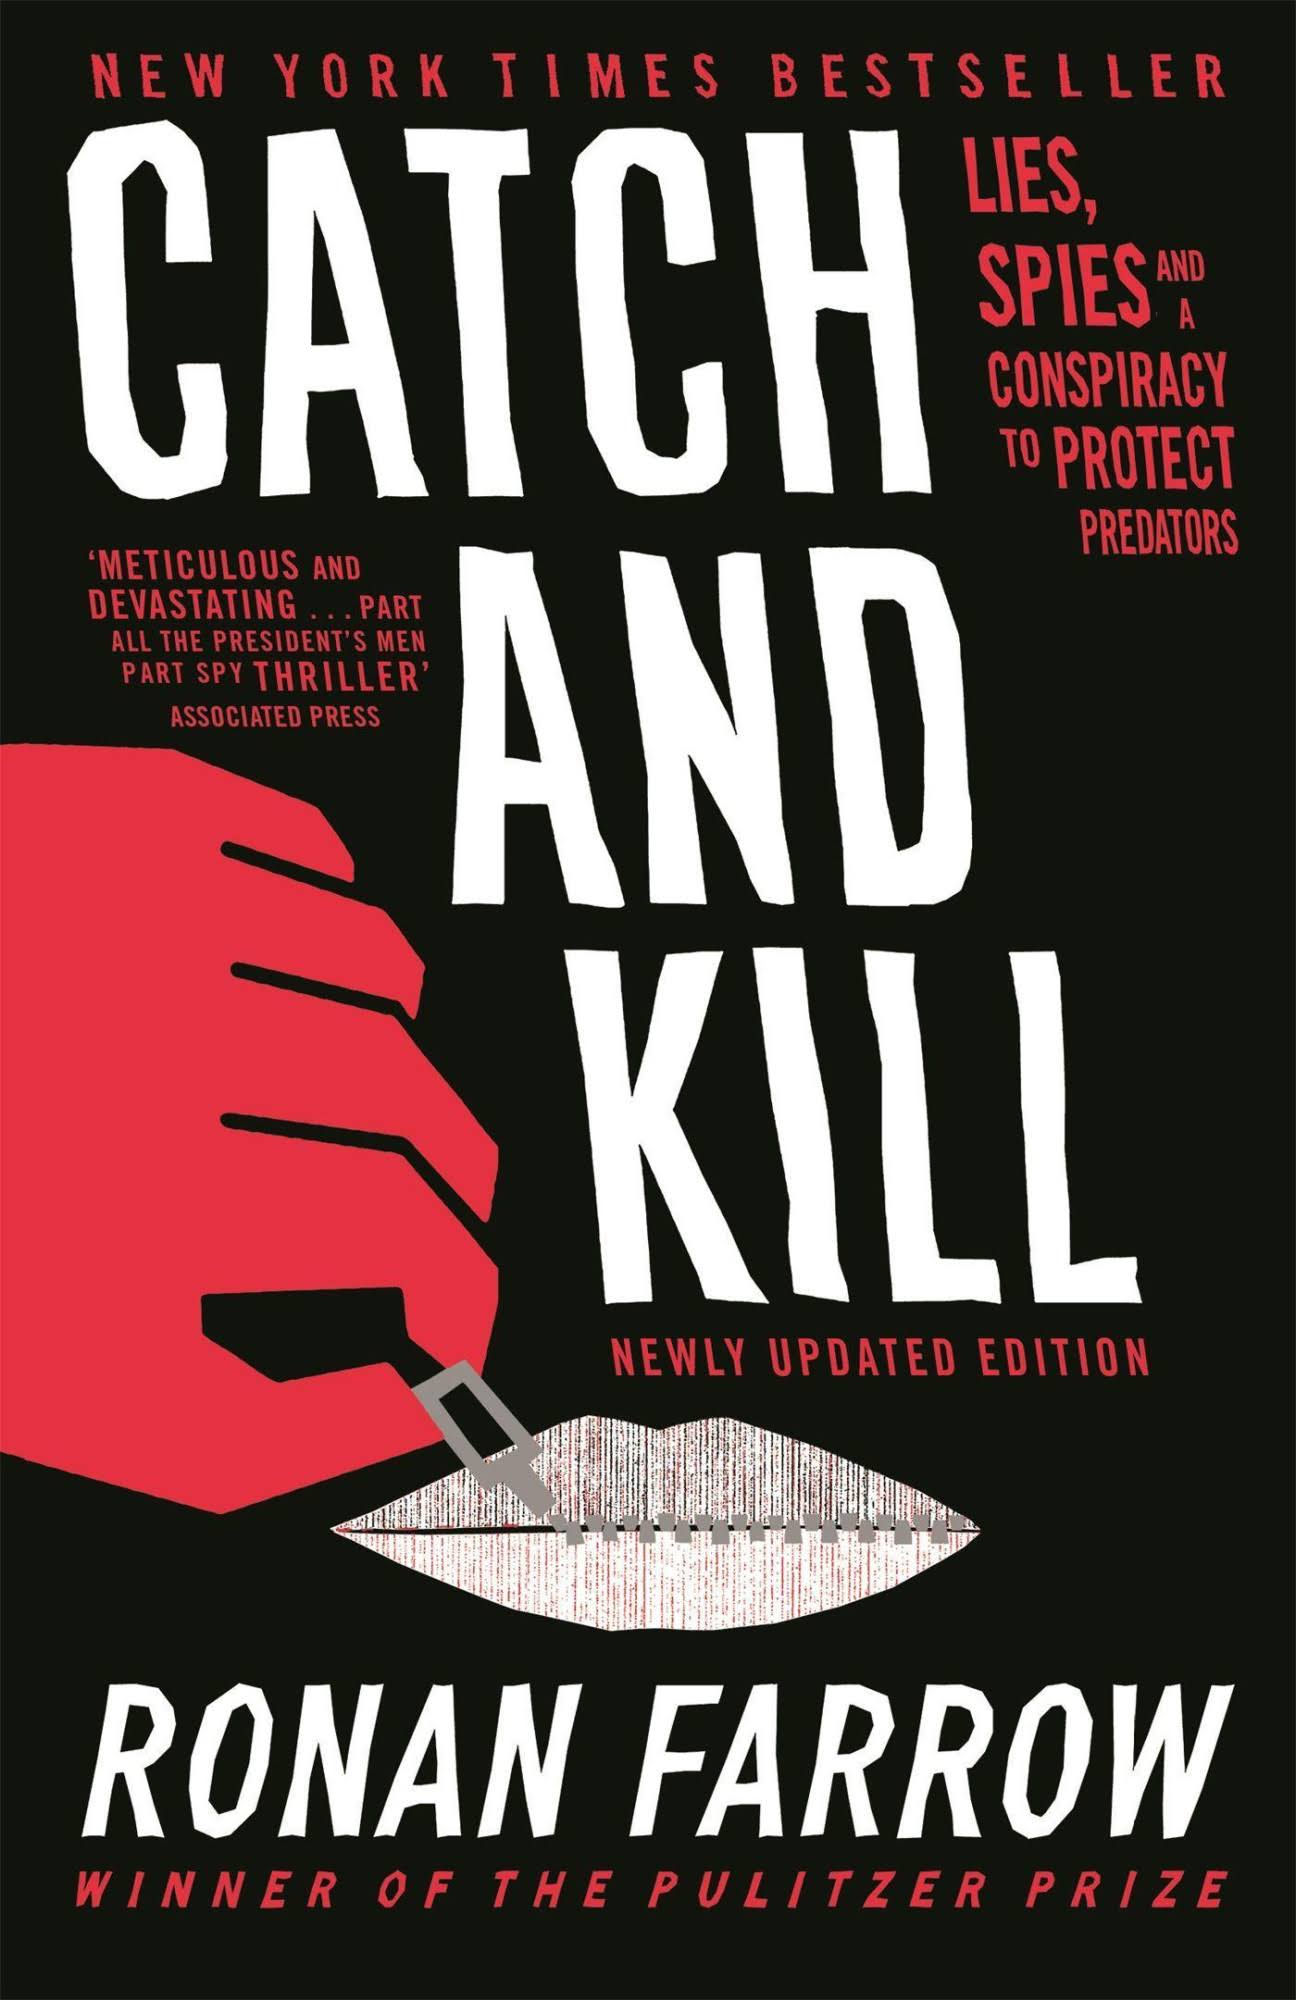 Catch and Kill: Lies, Spies and a Conspiracy to Protect Predators [Book]